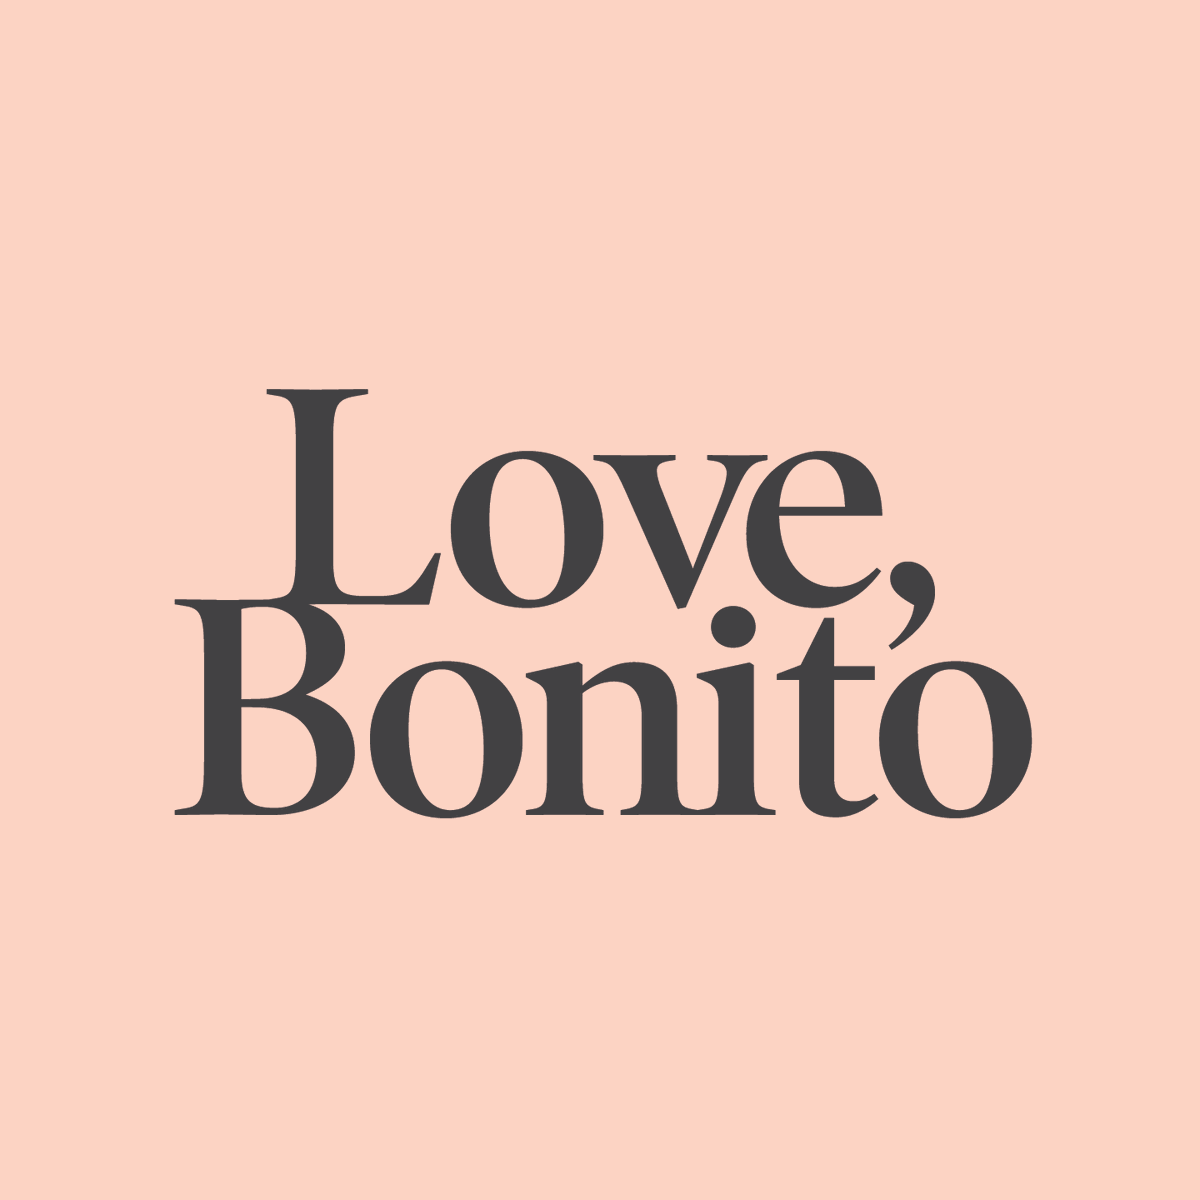 Get ready to unlock a world of fashion that's as unique as you are with Love, Bonito! 👗💖  #LoveBonitoFashion #ChicAndStylish #ExpressYourStyle #FashionThatSpeaks #WardrobeUpgrade

Visit: invol.co/cljpisk